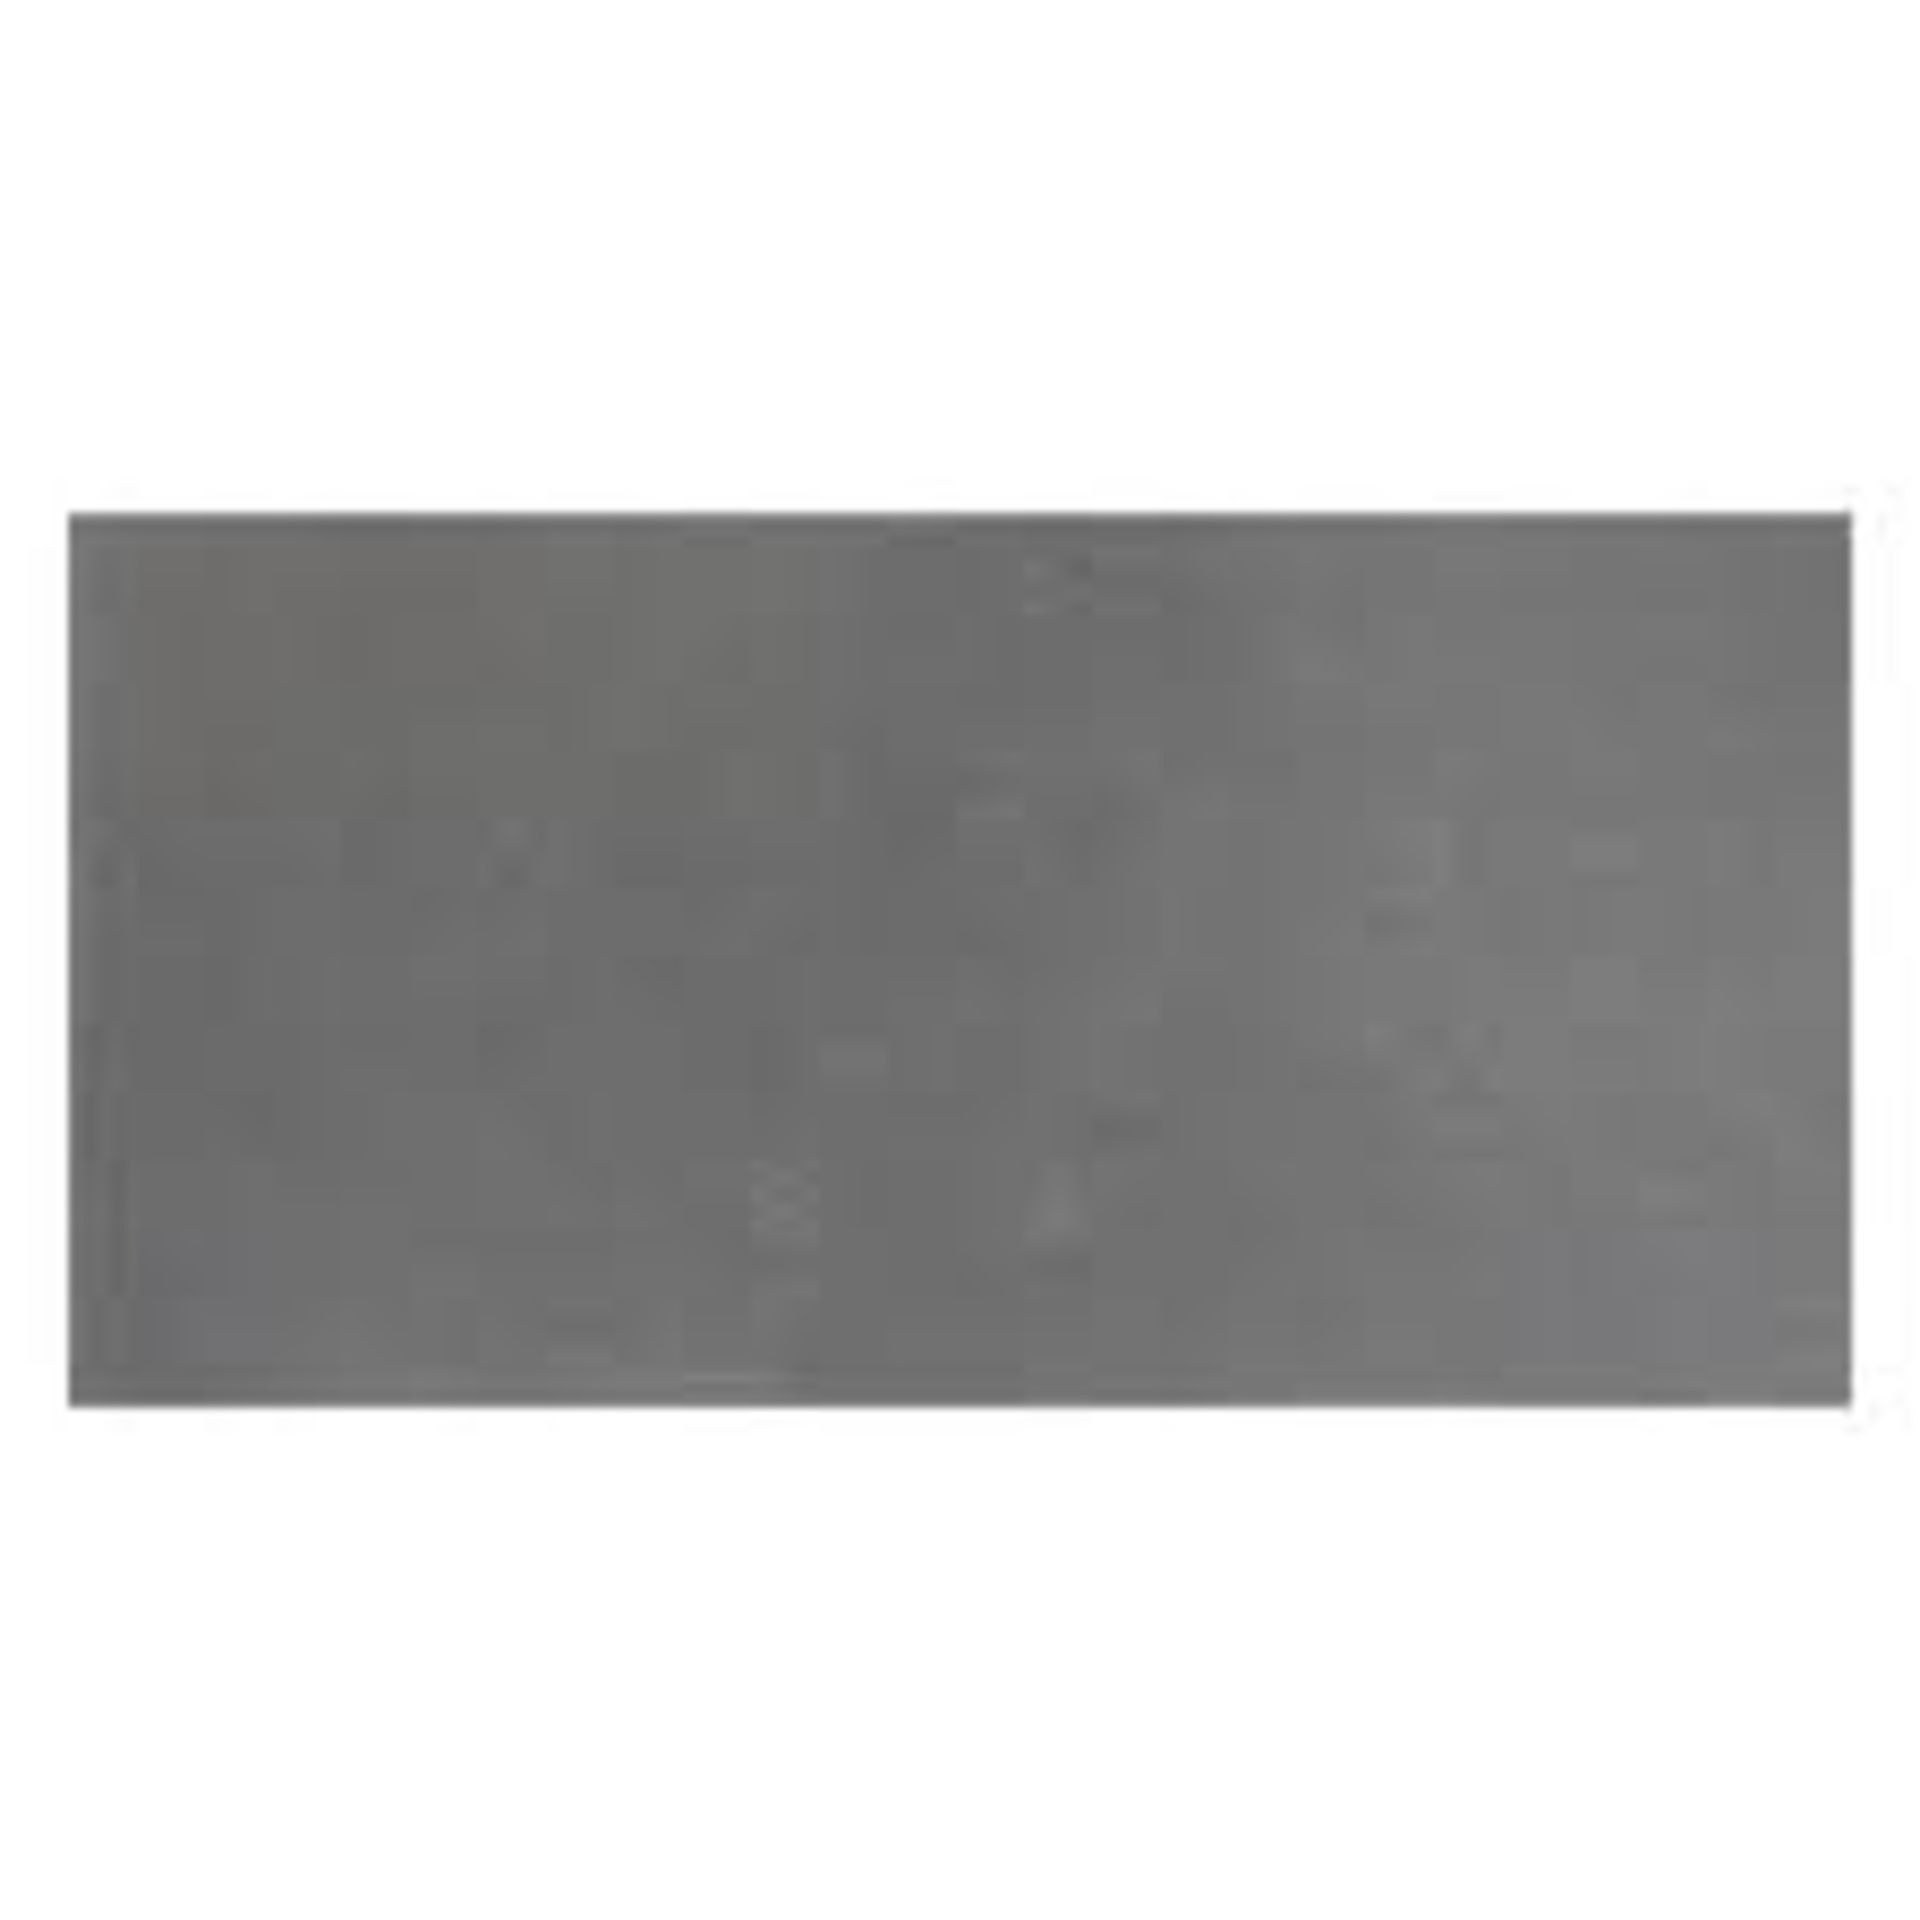 10 X PACKS OF PORCELLAN POLISHED ANTHRACITE GREY POLISHED FLOOR & WALL TILES. 300x600MM HIGH QUALITY - Image 3 of 3